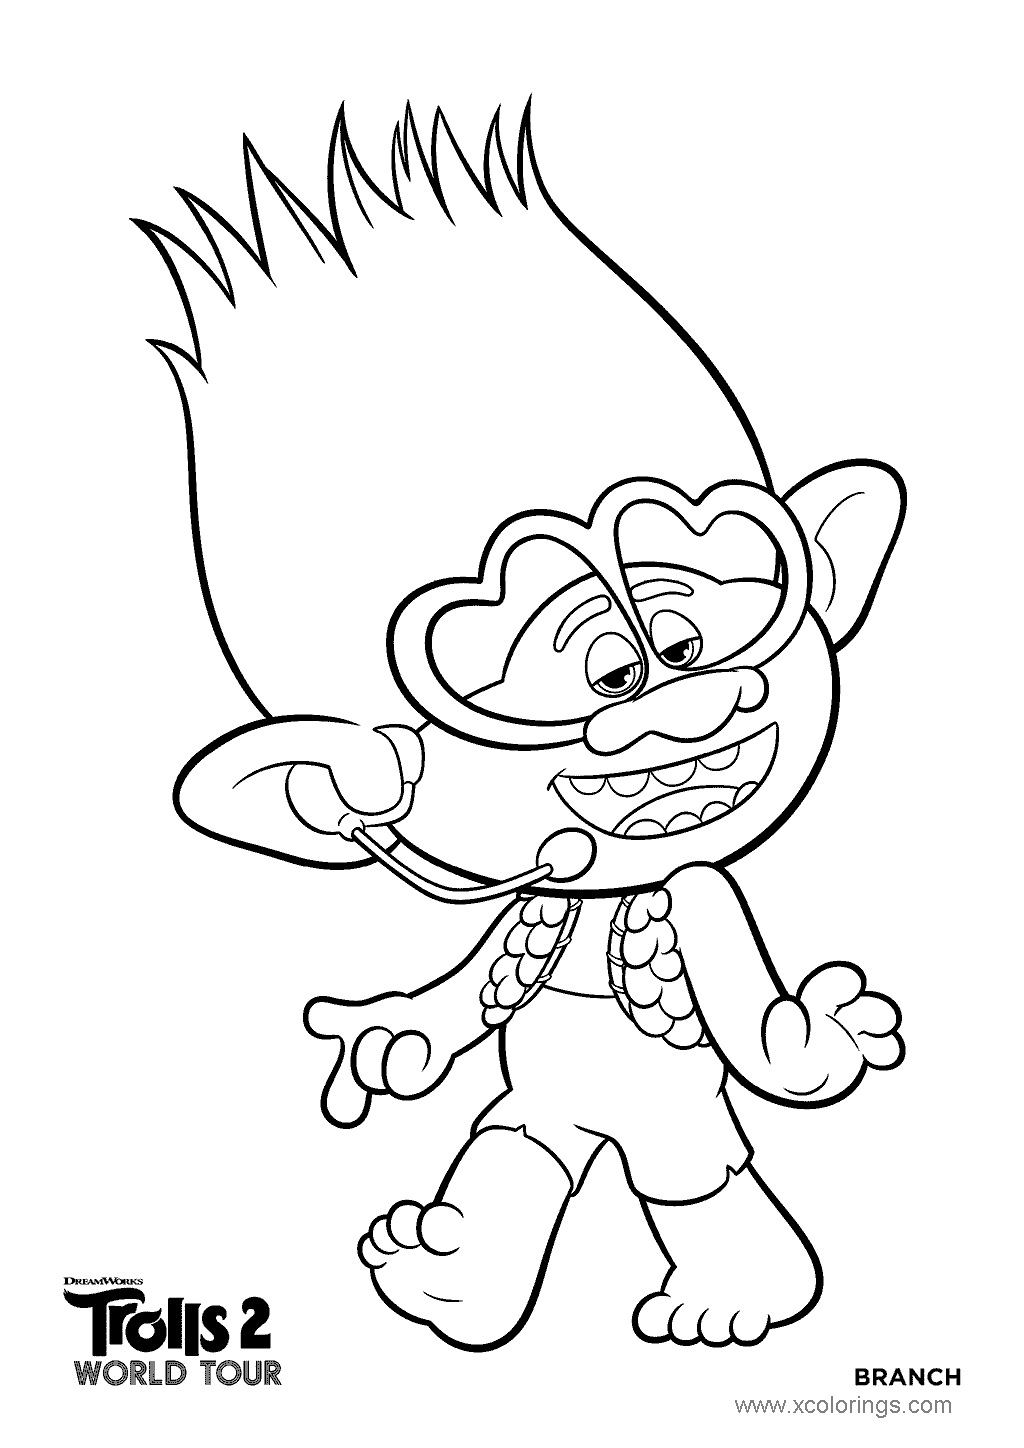 Free Branch from Trolls World Tour Coloring Pages printable